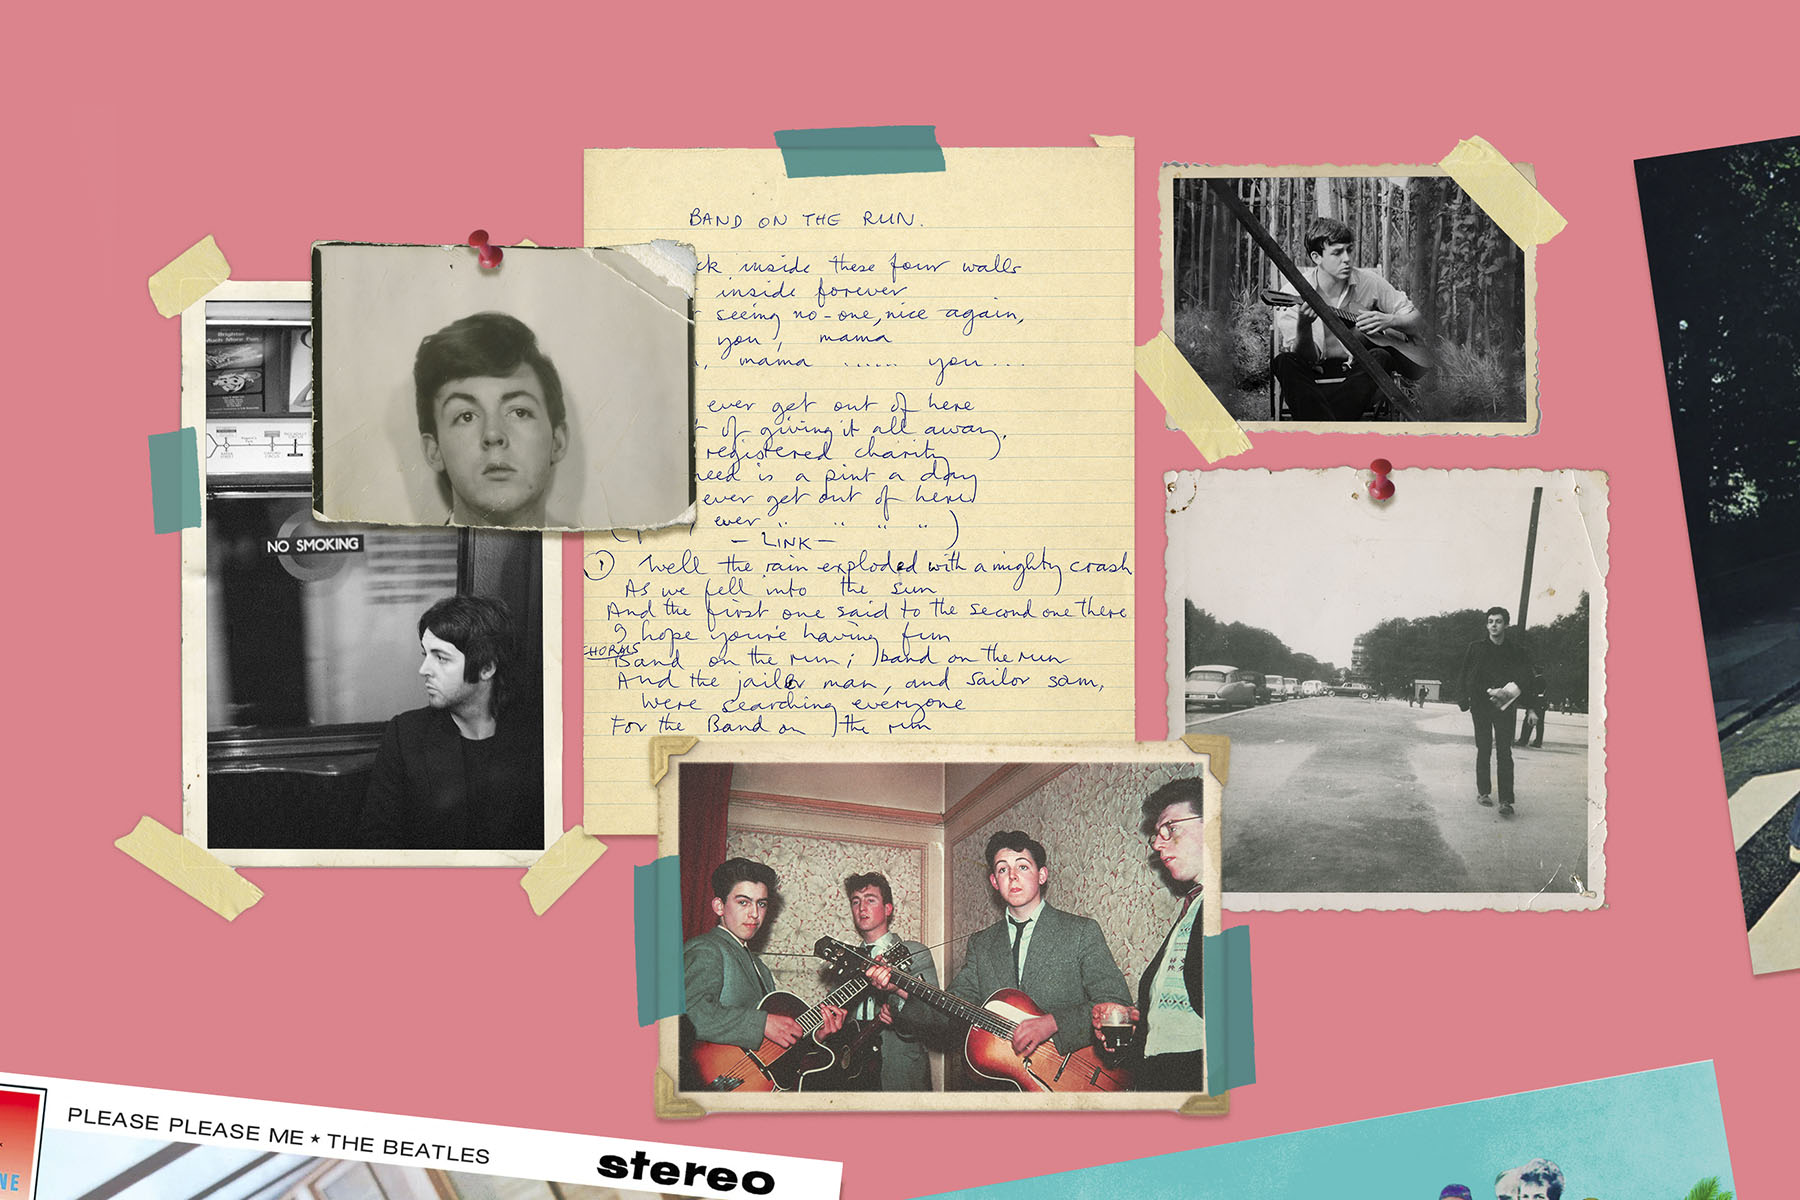 A scrapbook-style image of photographs of Paul McCartney through the years